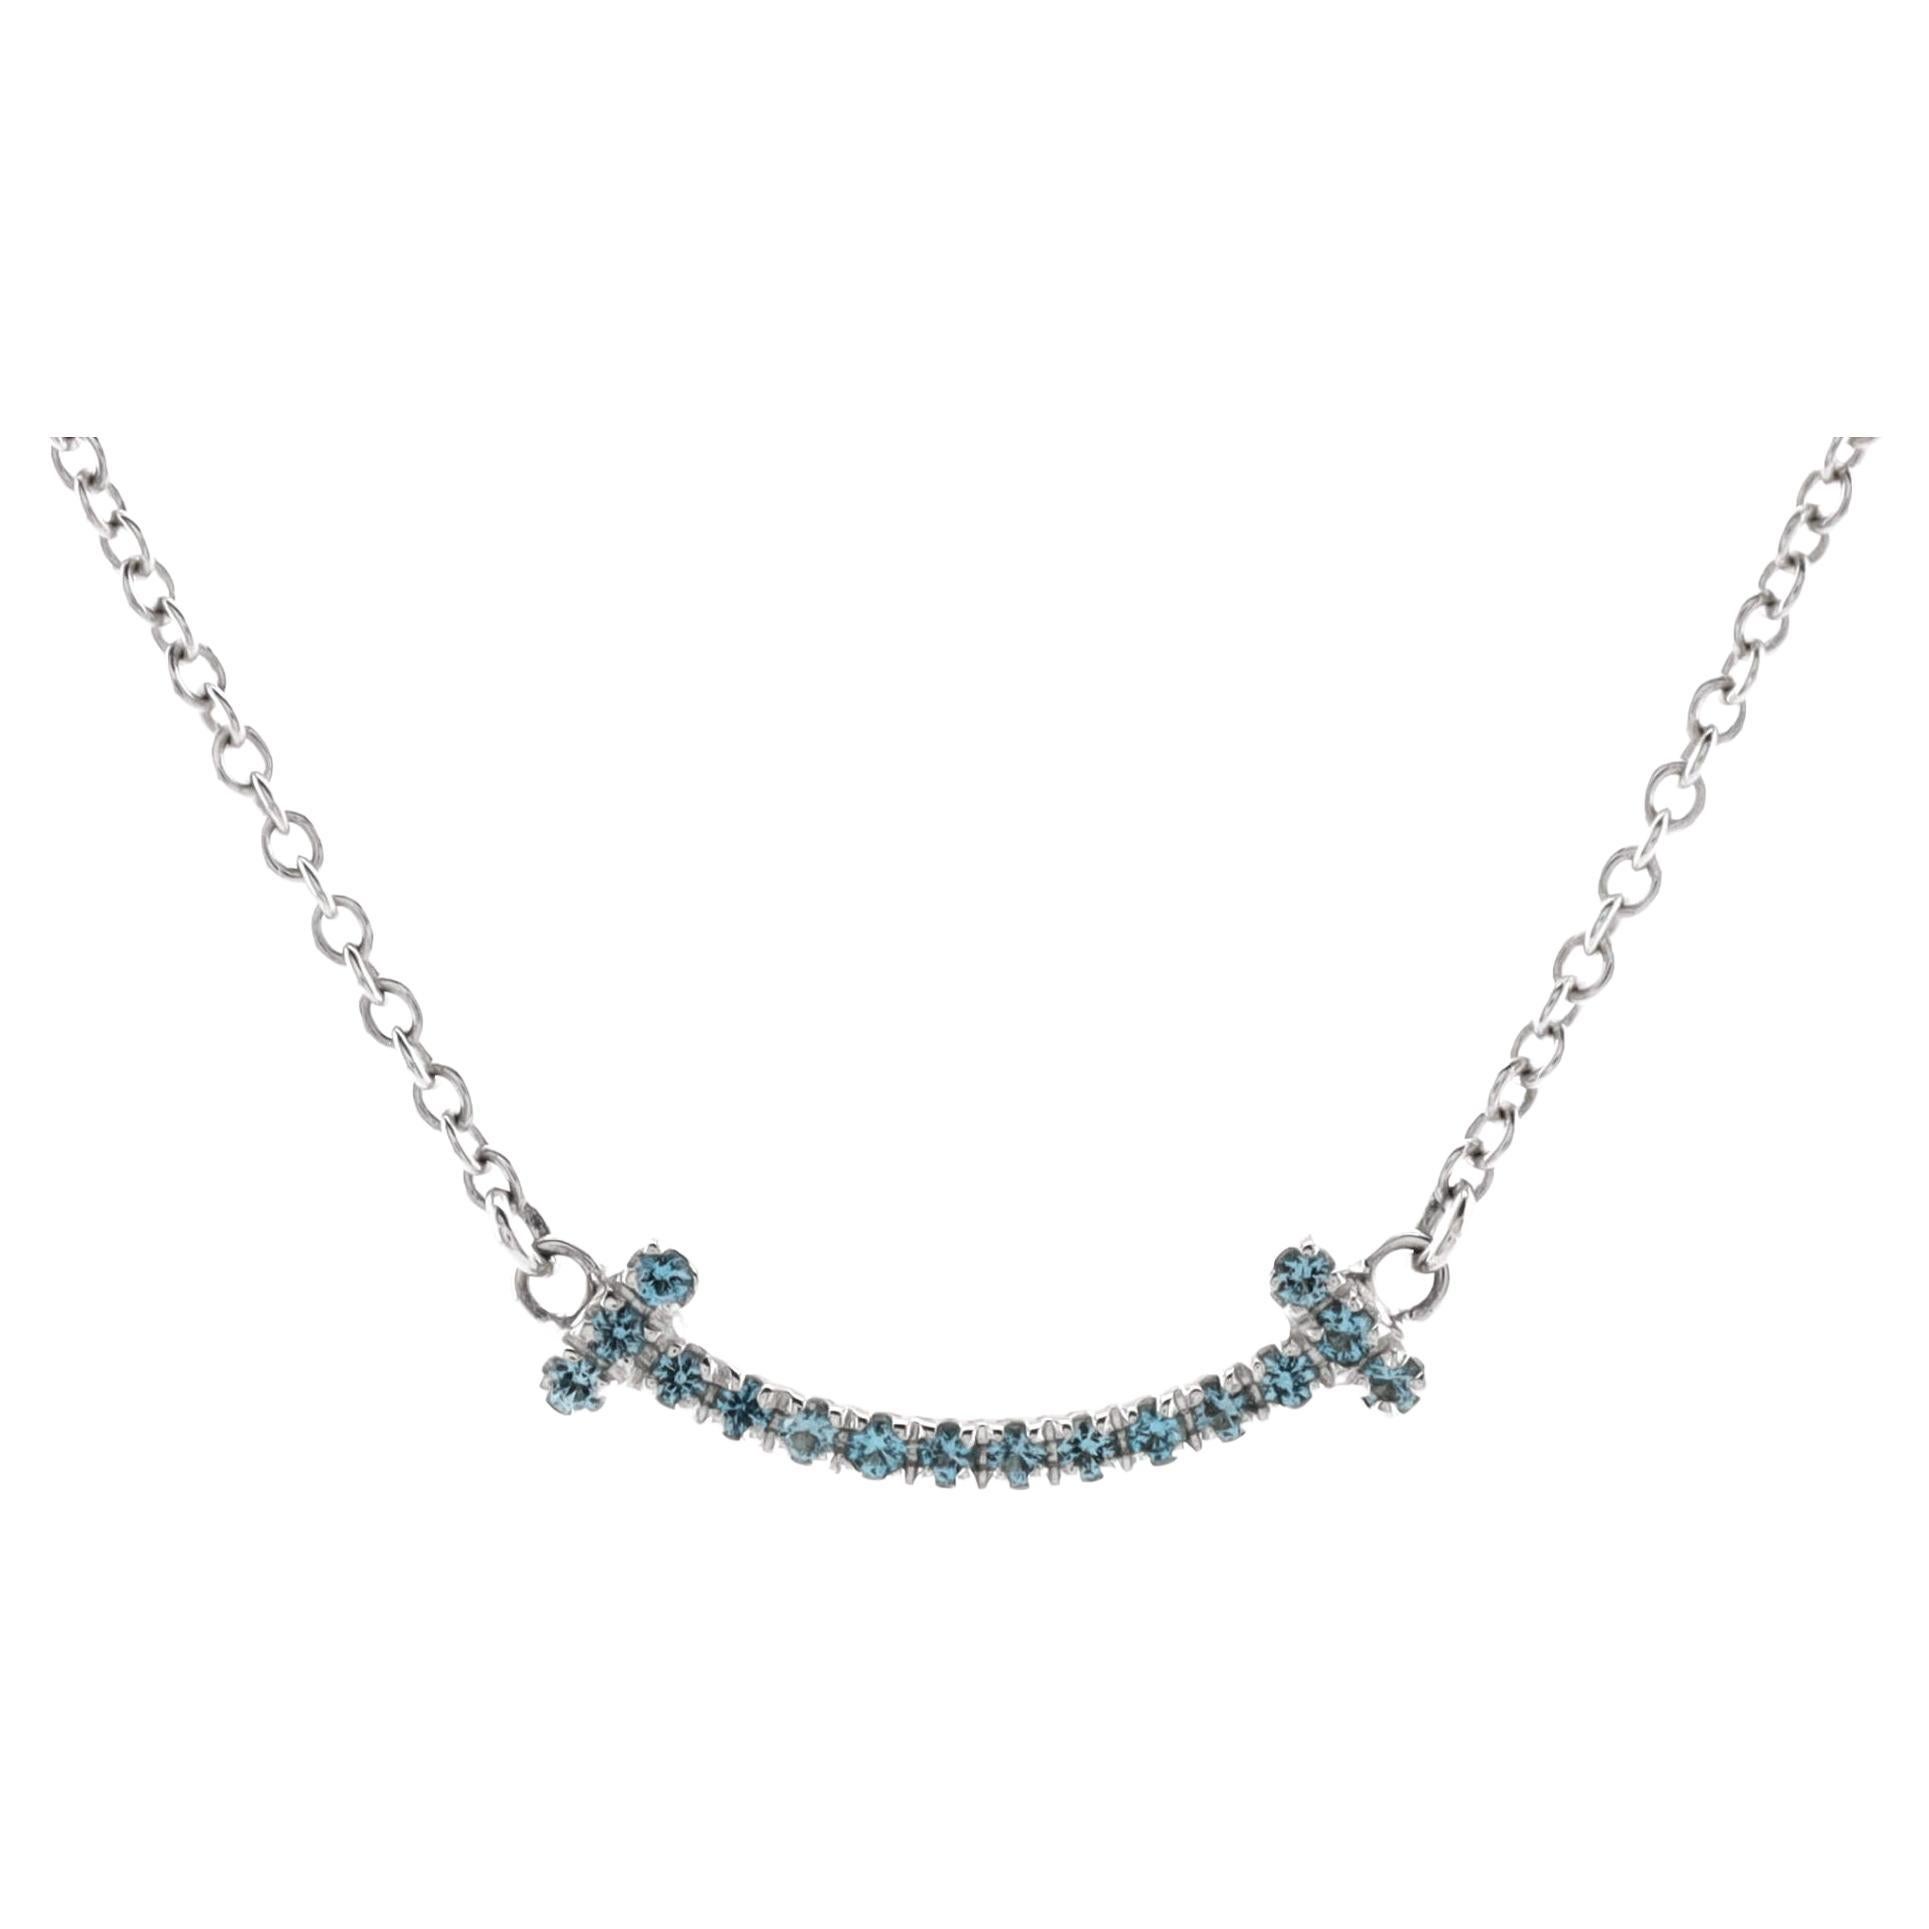 Tiffany & Co. T Smile Pendant Necklace 18K White Gold with Blue Topaz Mini For Sale